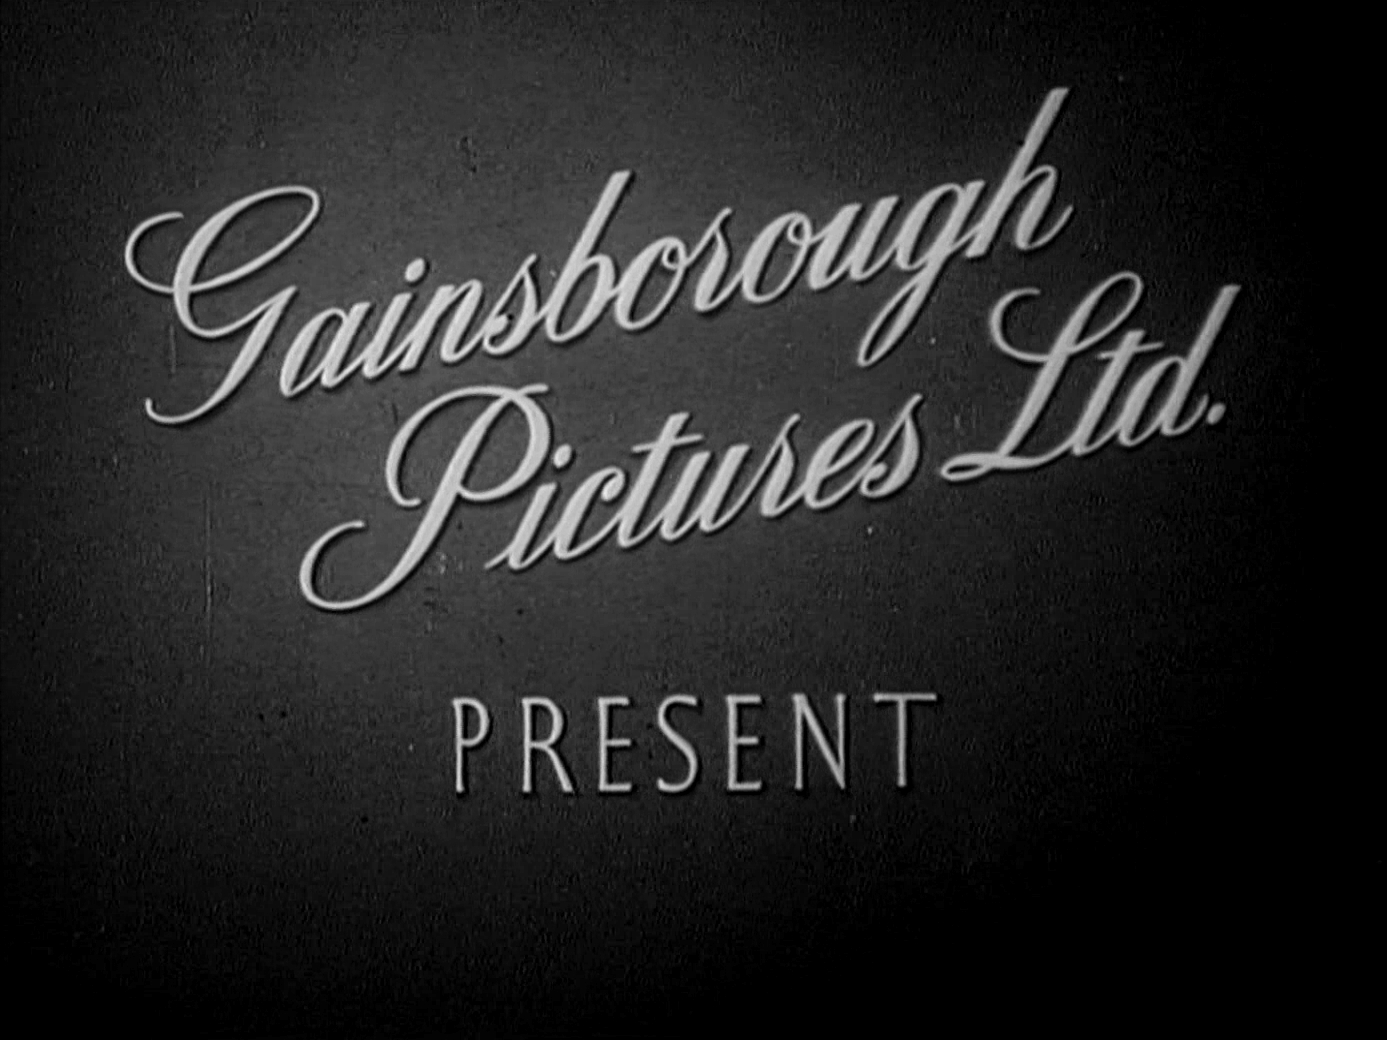 Main title from Waterloo Road (1945) (3). Gainsborough Pictures Ltd present